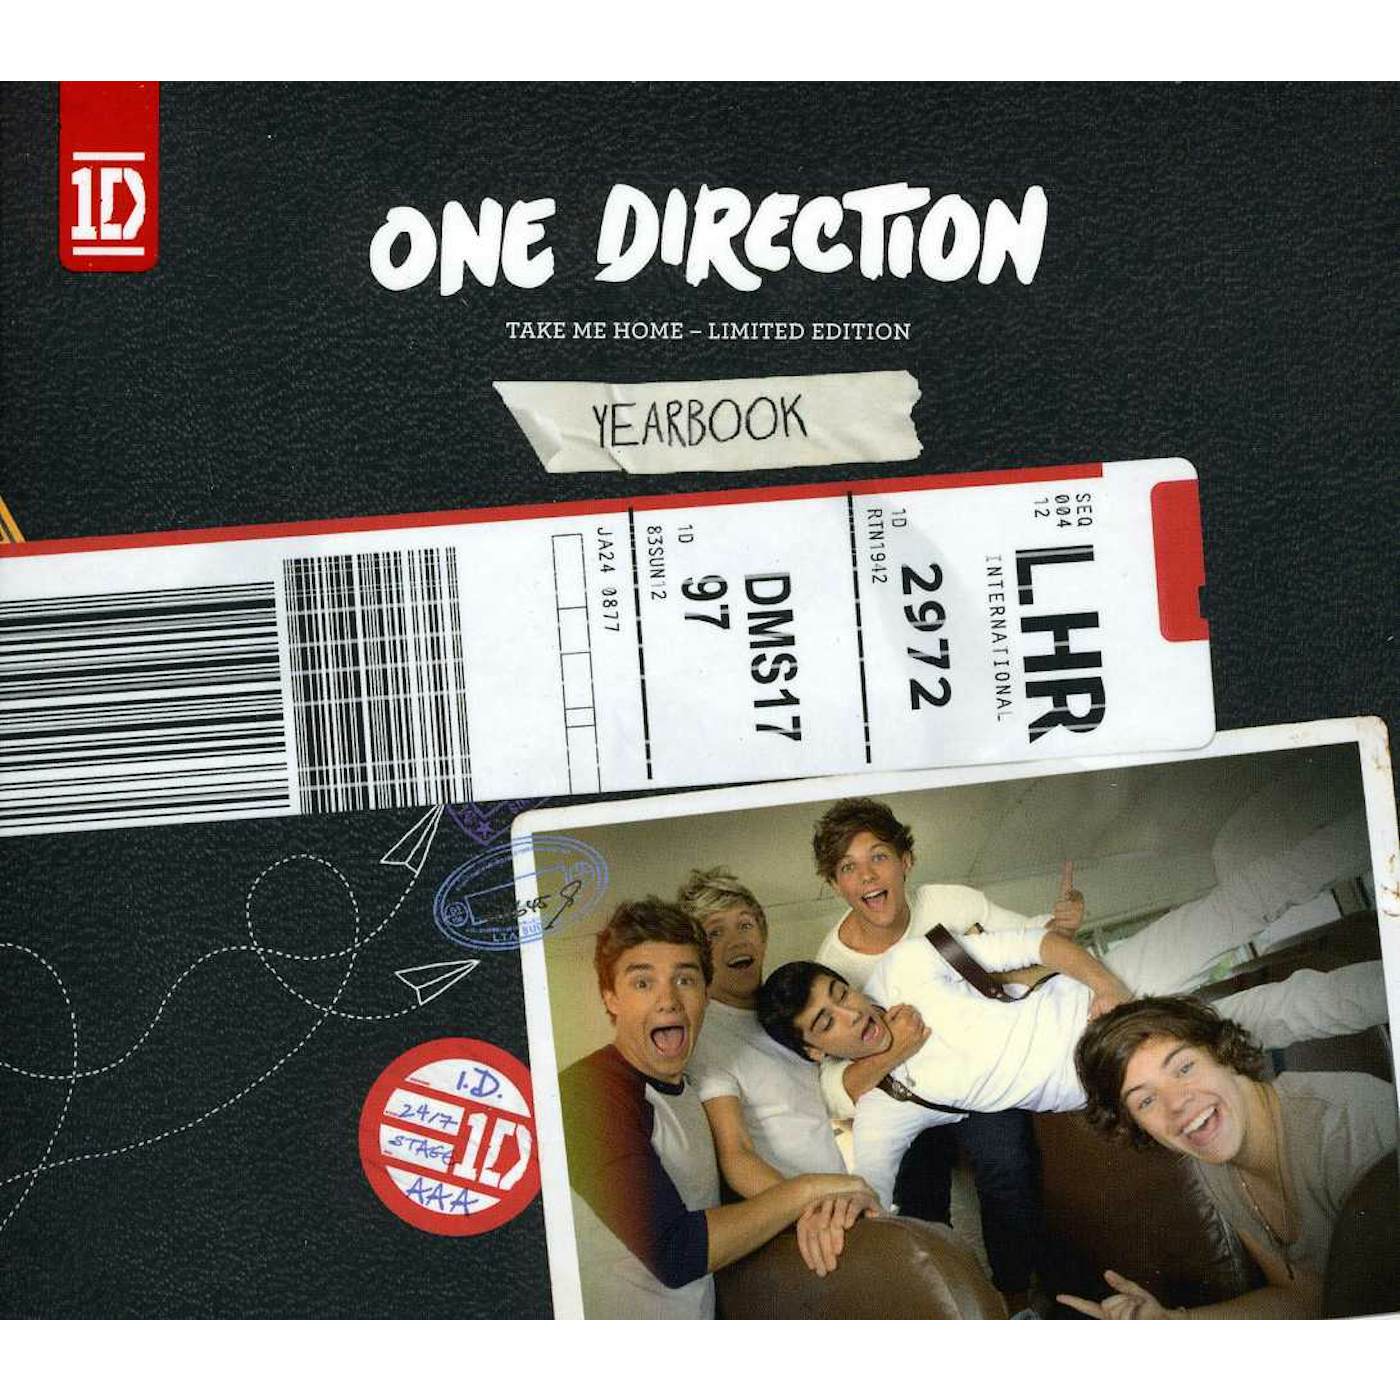 One Direction TAKE ME HOME: YEARBOOK EDITION (AUSTRALIAN) CD